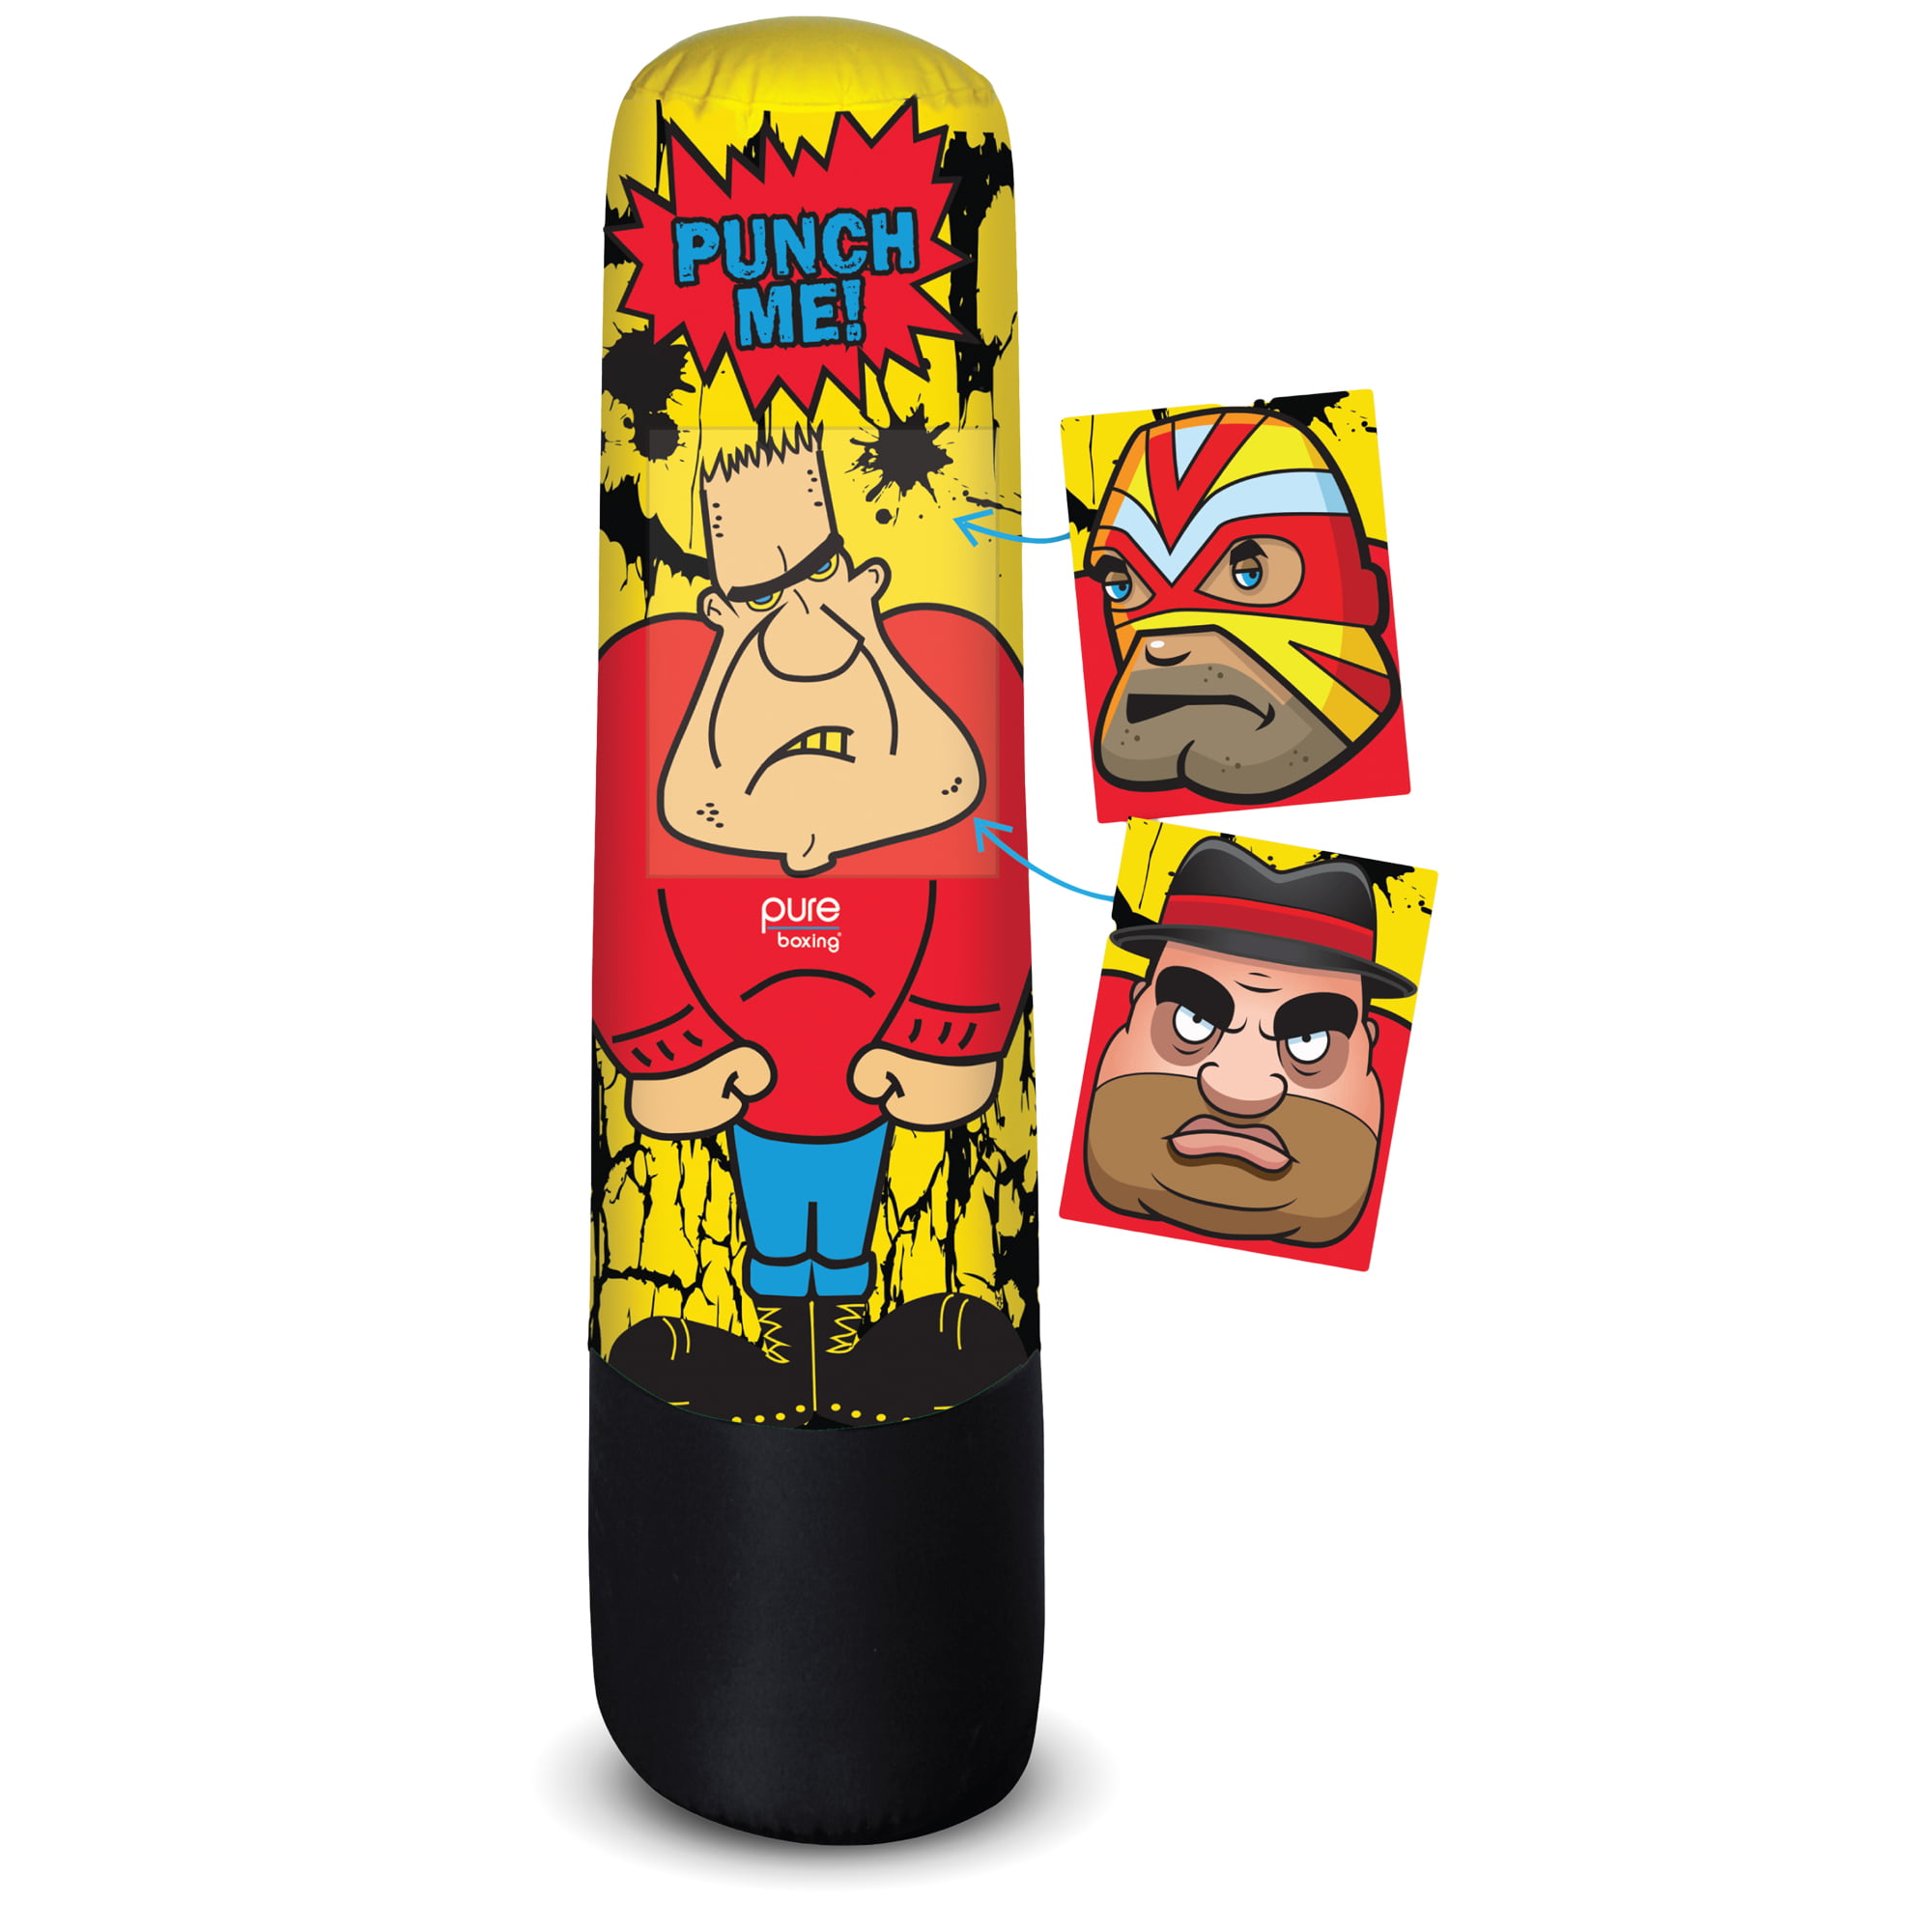 Punching Bags For Sale At Walmart